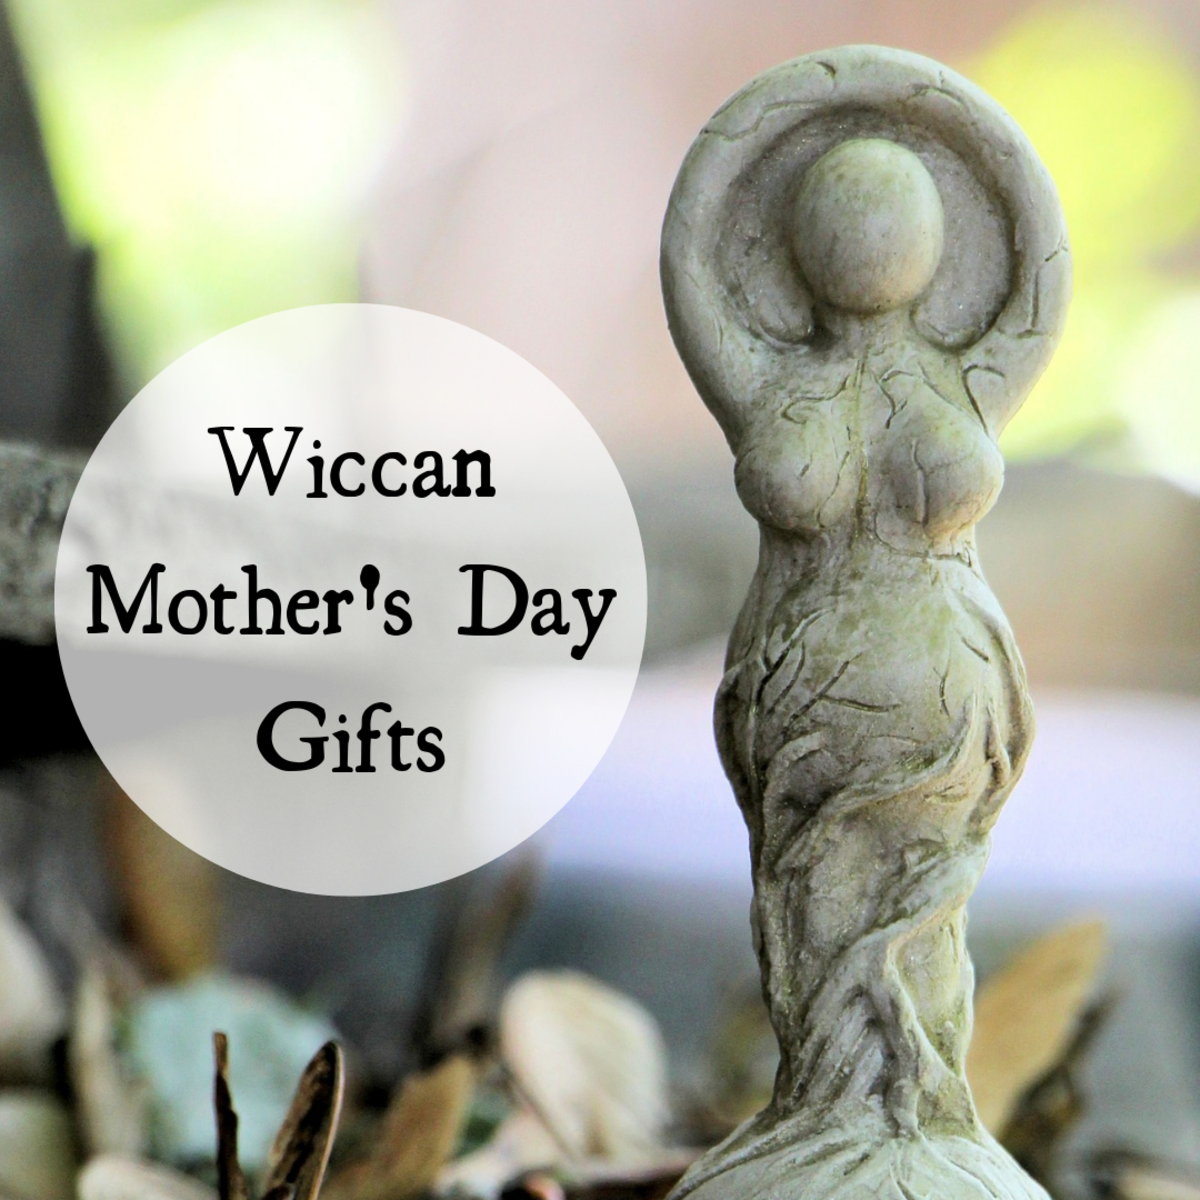 Discover six gift ideas for Wiccans for Mother's Day, plus some additional inexpensive gift suggestions.